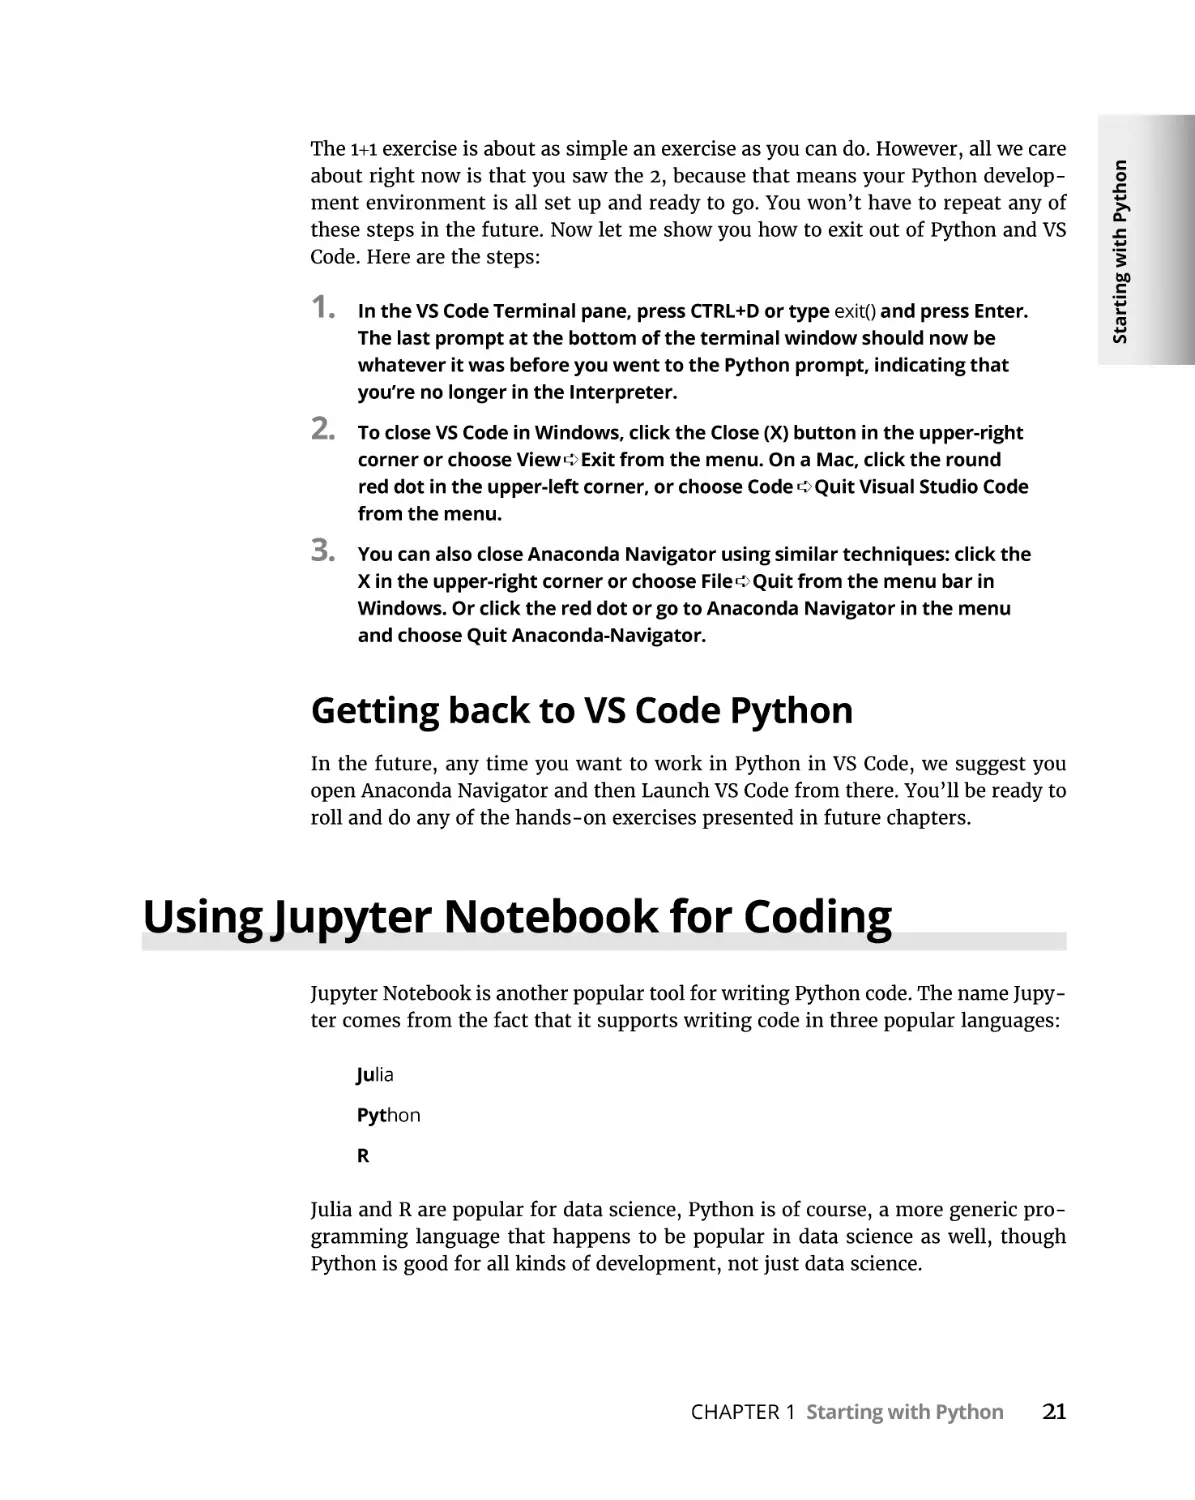 Getting back to VS Code Python
Using Jupyter Notebook for Coding